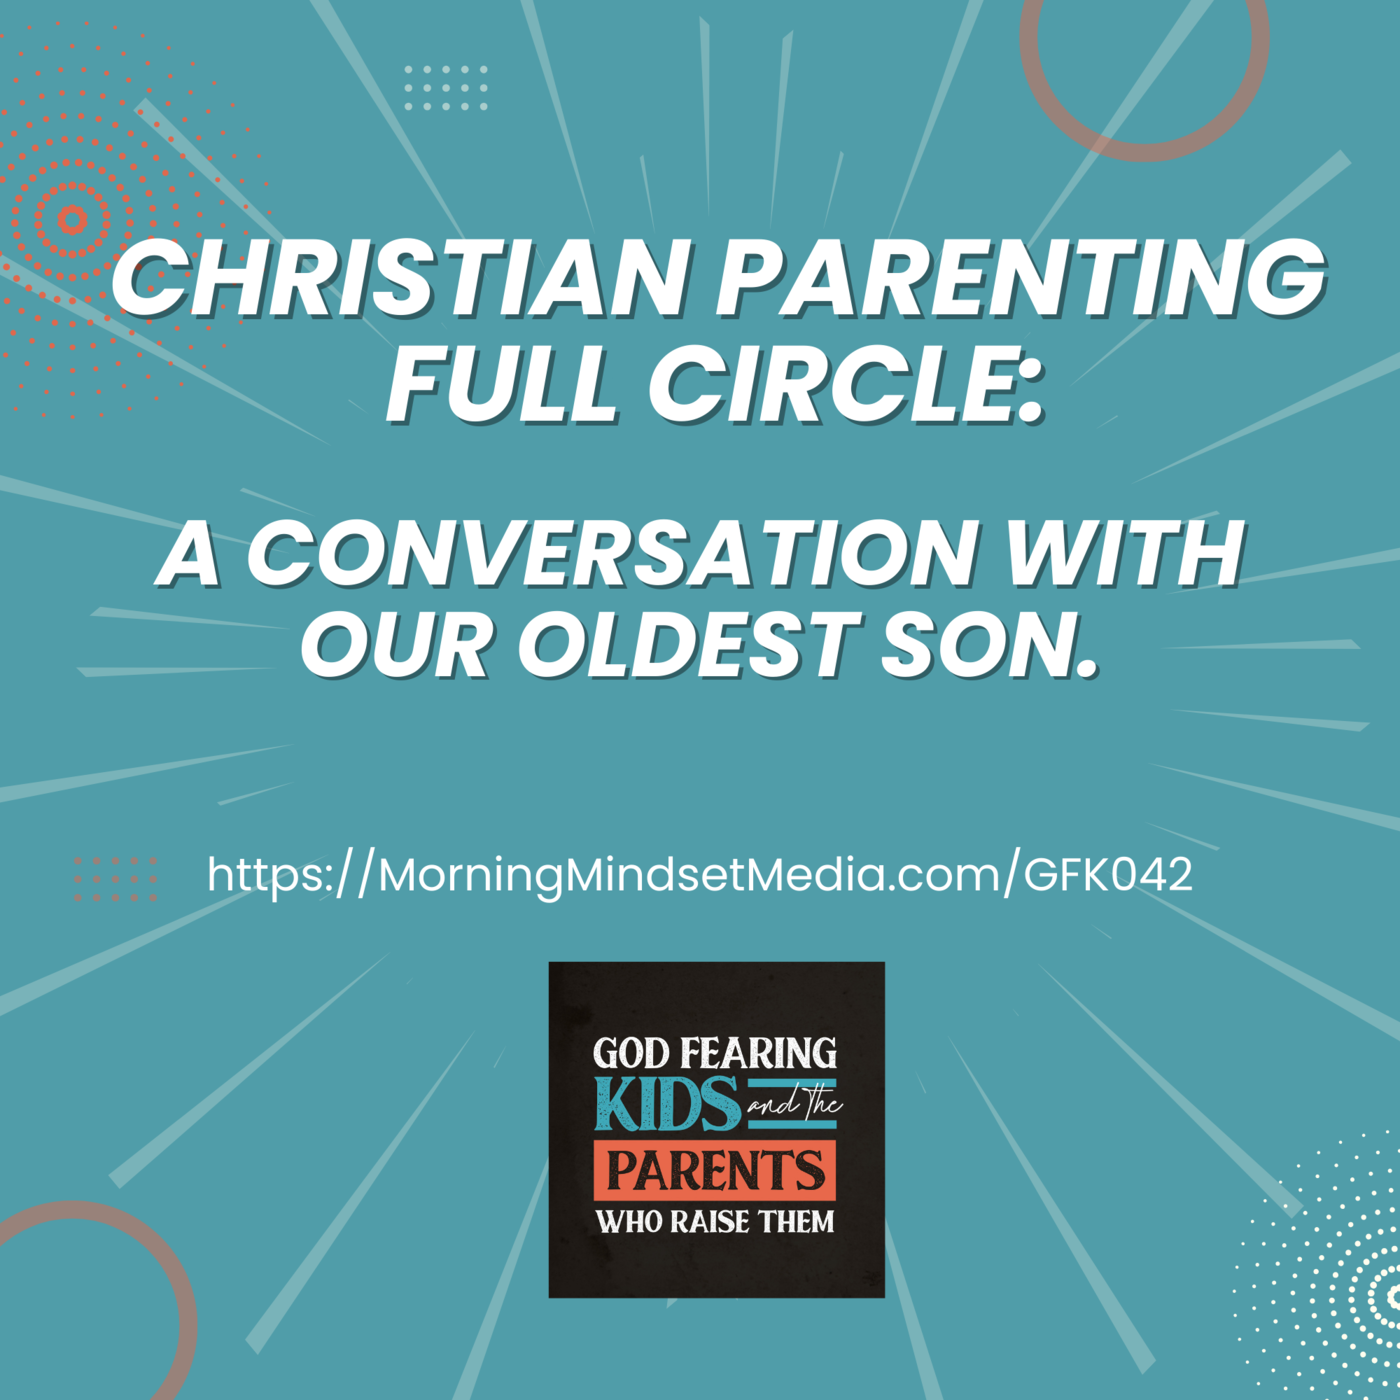 042: Christian parenting full circle : A conversation with our oldest child. Aaron